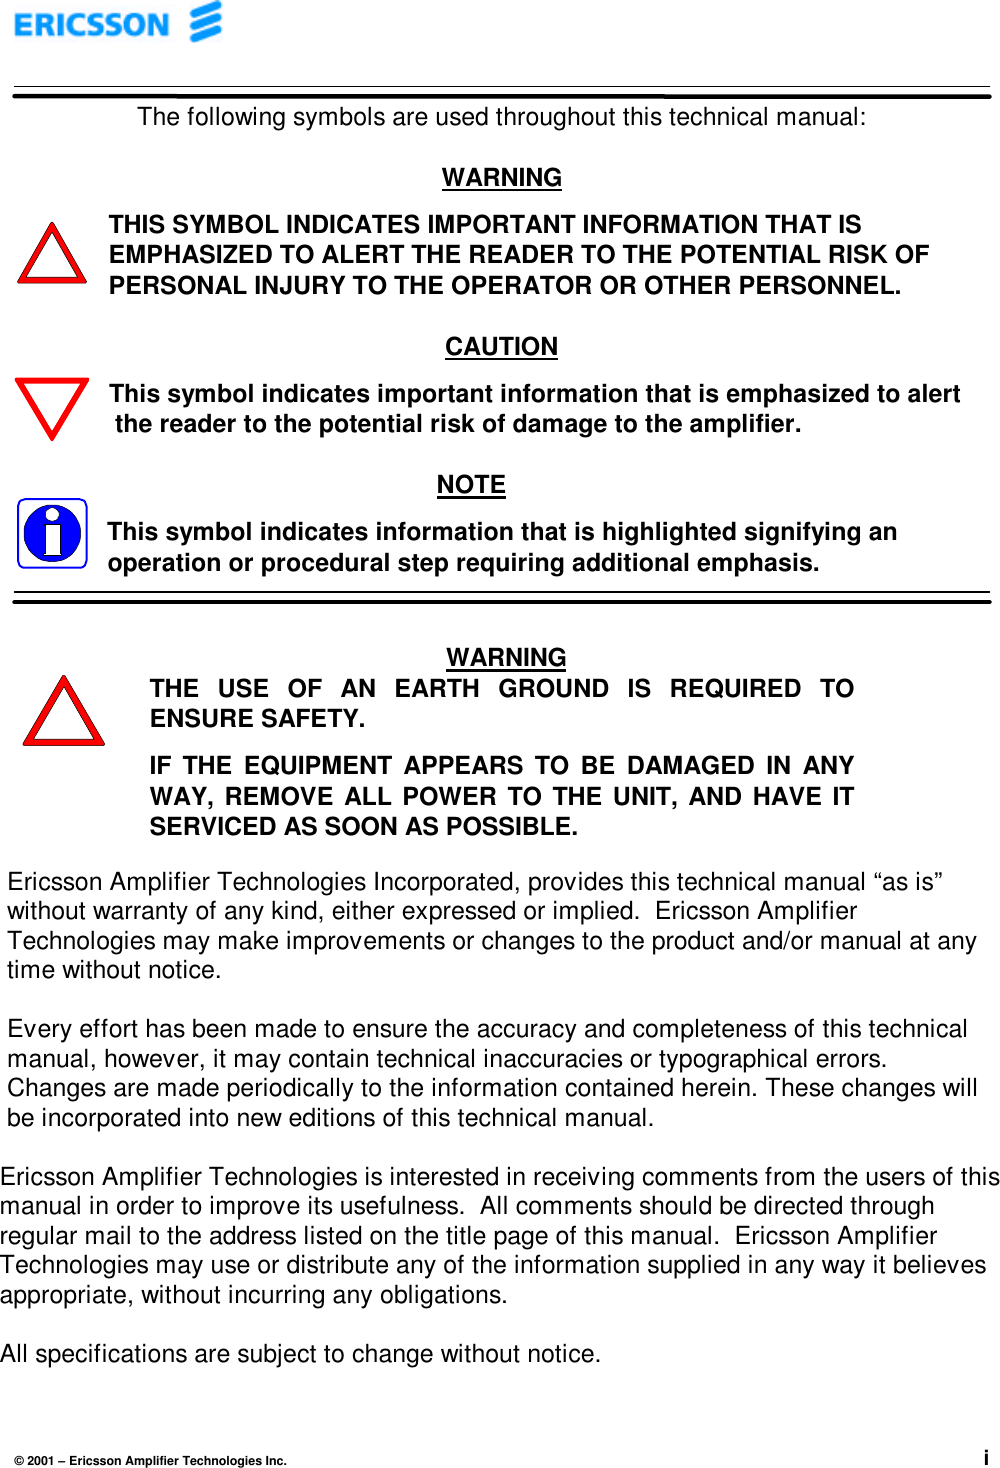 © 2001 – Ericsson Amplifier Technologies Inc. iThe following symbols are used throughout this technical manual:WARNINGTHIS SYMBOL INDICATES IMPORTANT INFORMATION THAT ISEMPHASIZED TO ALERT THE READER TO THE POTENTIAL RISK OFPERSONAL INJURY TO THE OPERATOR OR OTHER PERSONNEL.CAUTIONThis symbol indicates important information that is emphasized to alert   the reader to the potential risk of damage to the amplifier.NOTEThis symbol indicates information that is highlighted signifying anoperation or procedural step requiring additional emphasis.Ericsson Amplifier Technologies Incorporated, provides this technical manual “as is”without warranty of any kind, either expressed or implied.  Ericsson AmplifierTechnologies may make improvements or changes to the product and/or manual at anytime without notice.Every effort has been made to ensure the accuracy and completeness of this technicalmanual, however, it may contain technical inaccuracies or typographical errors.Changes are made periodically to the information contained herein. These changes willbe incorporated into new editions of this technical manual.Ericsson Amplifier Technologies is interested in receiving comments from the users of thismanual in order to improve its usefulness.  All comments should be directed throughregular mail to the address listed on the title page of this manual.  Ericsson AmplifierTechnologies may use or distribute any of the information supplied in any way it believesappropriate, without incurring any obligations.All specifications are subject to change without notice.WARNINGTHE USE OF AN EARTH GROUND IS REQUIRED TOENSURE SAFETY.IF THE EQUIPMENT APPEARS TO BE DAMAGED IN ANYWAY, REMOVE ALL POWER TO THE UNIT, AND HAVE ITSERVICED AS SOON AS POSSIBLE.